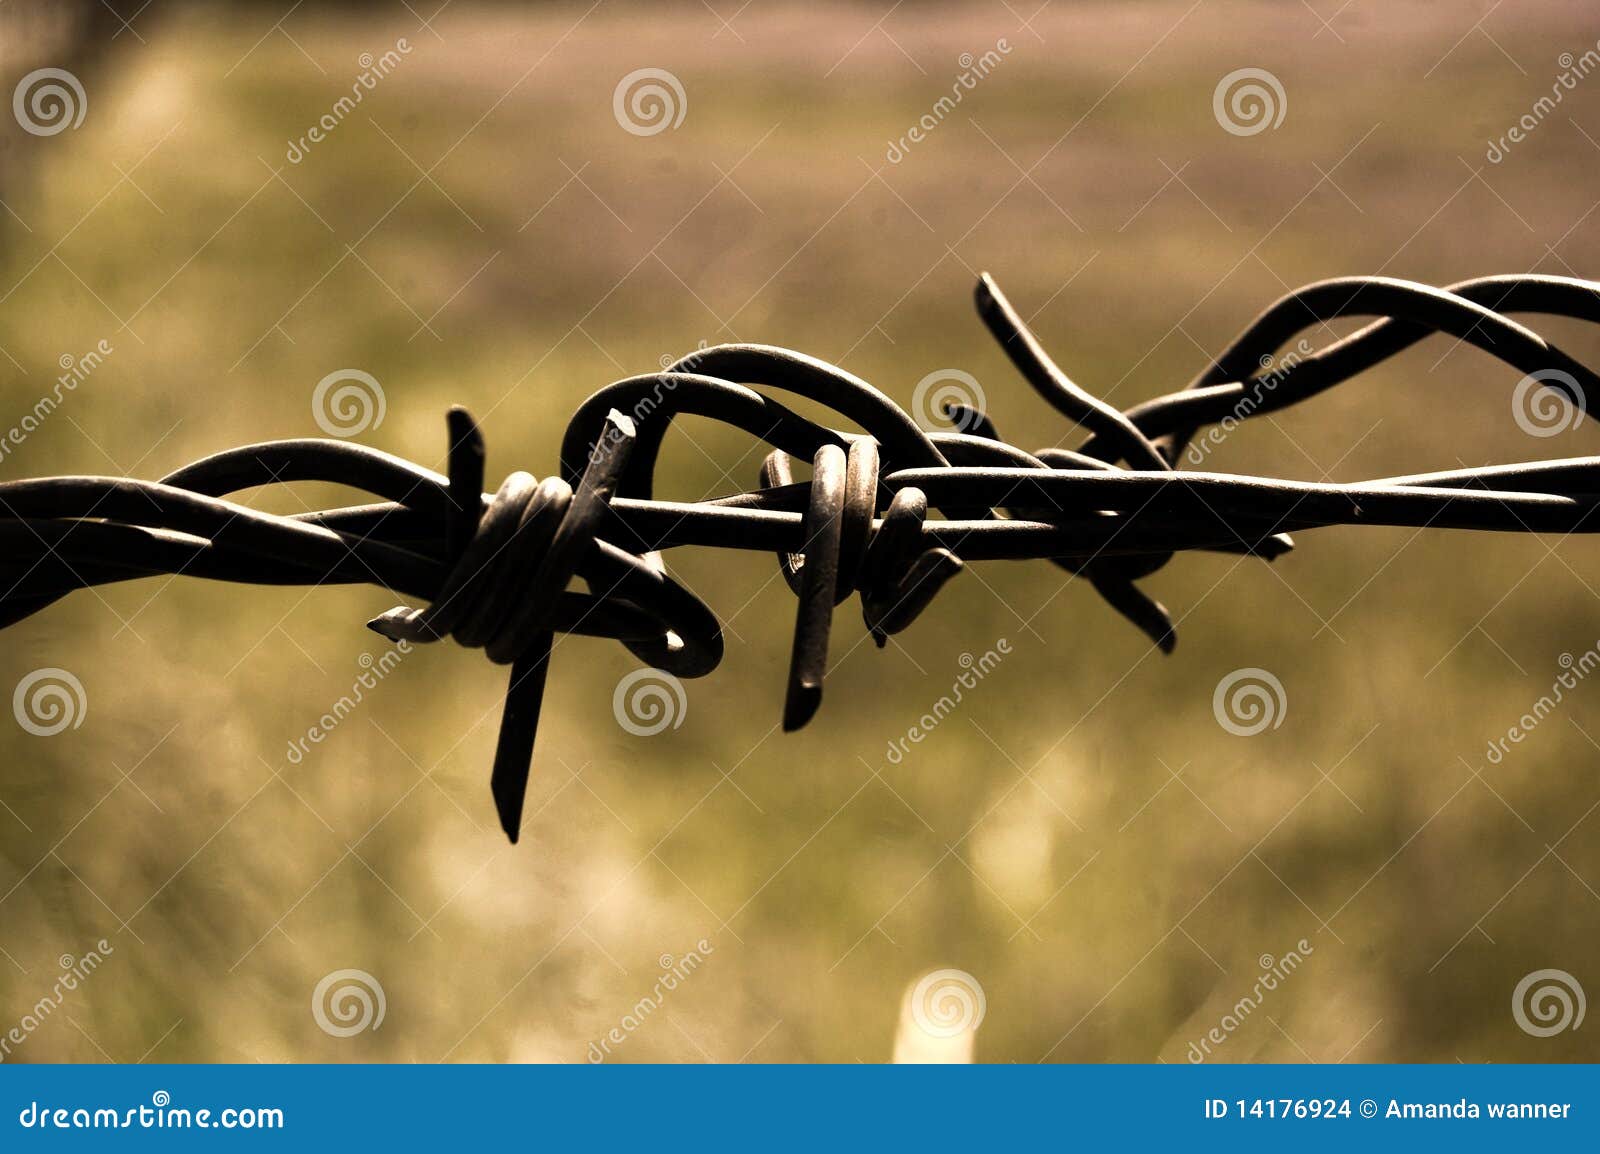 barbwire fence